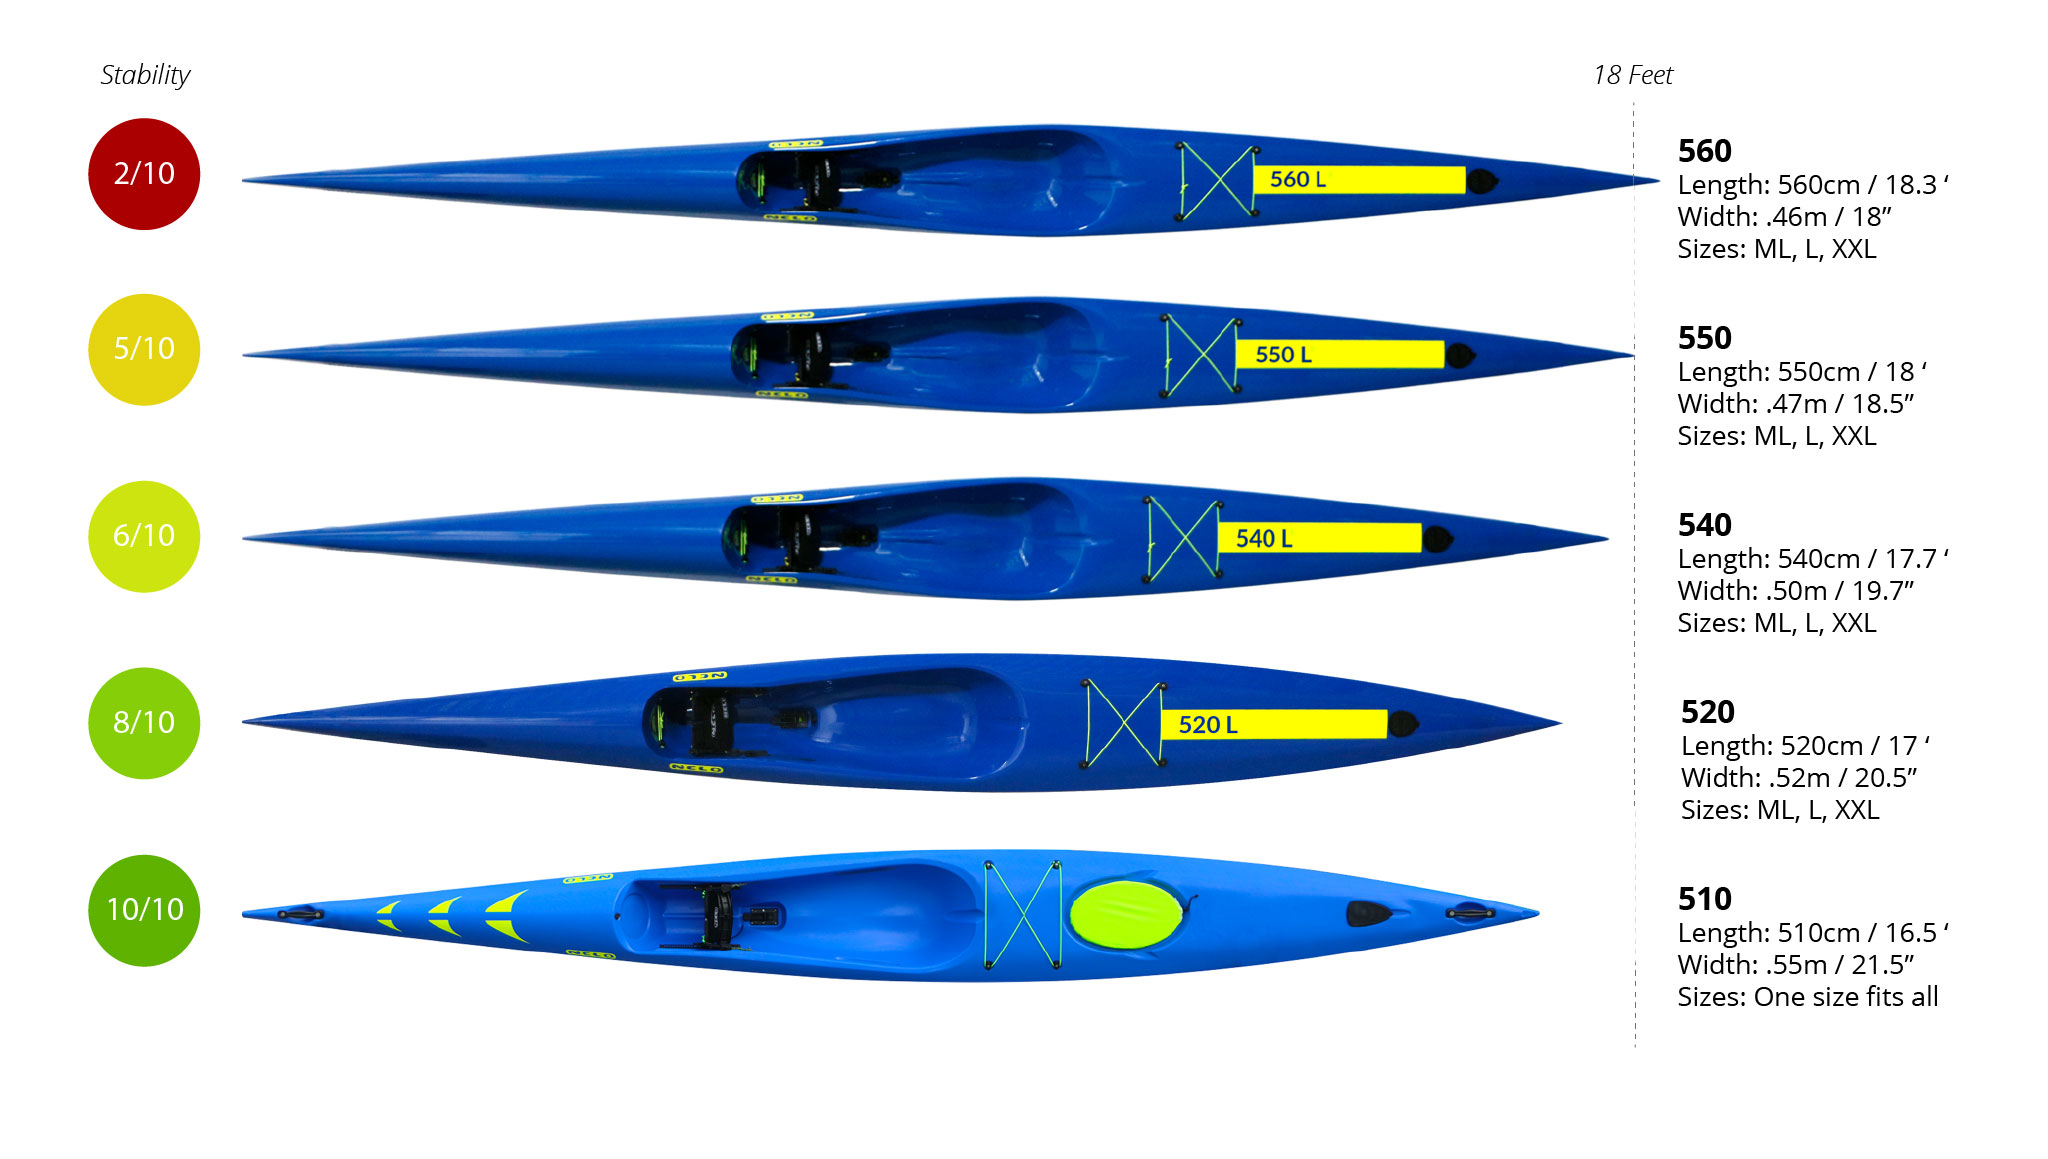 Nelo Surfski Chart - charts of specs and stability for 510, 520, 540, 550, 560